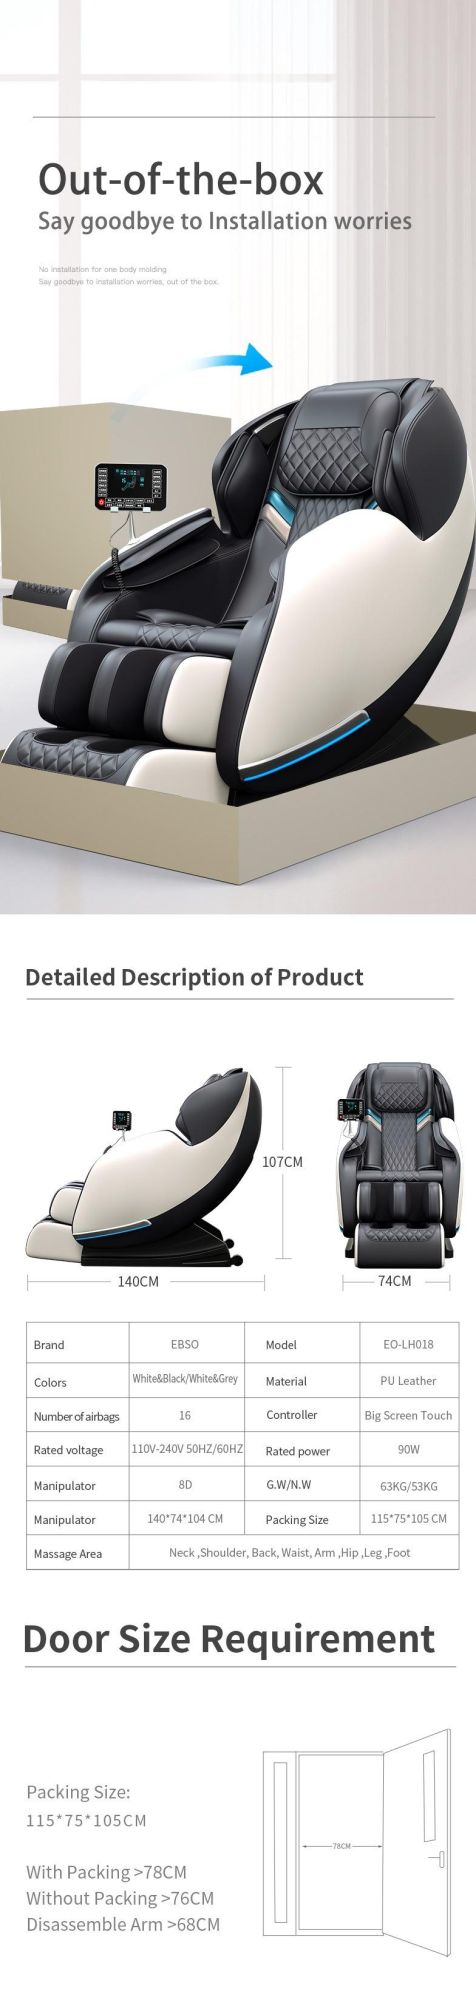 Relaxing Whole Body Massage Chair Air Pressure SPA Wholesale Price Luxury Massage Chair 3D